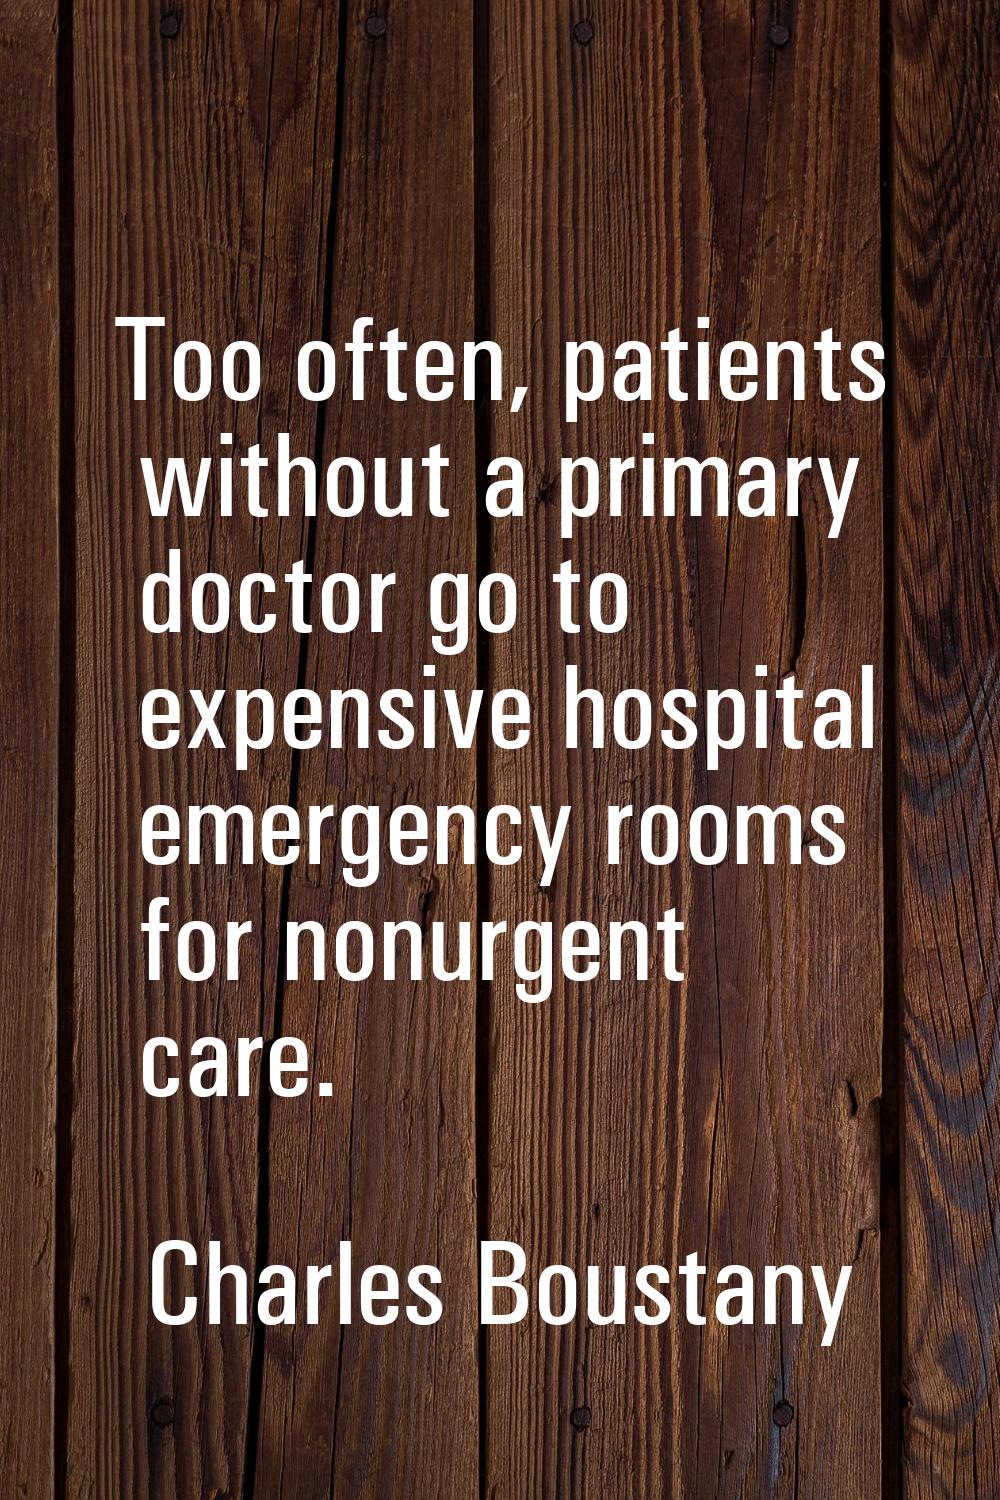 Too often, patients without a primary doctor go to expensive hospital emergency rooms for nonurgent